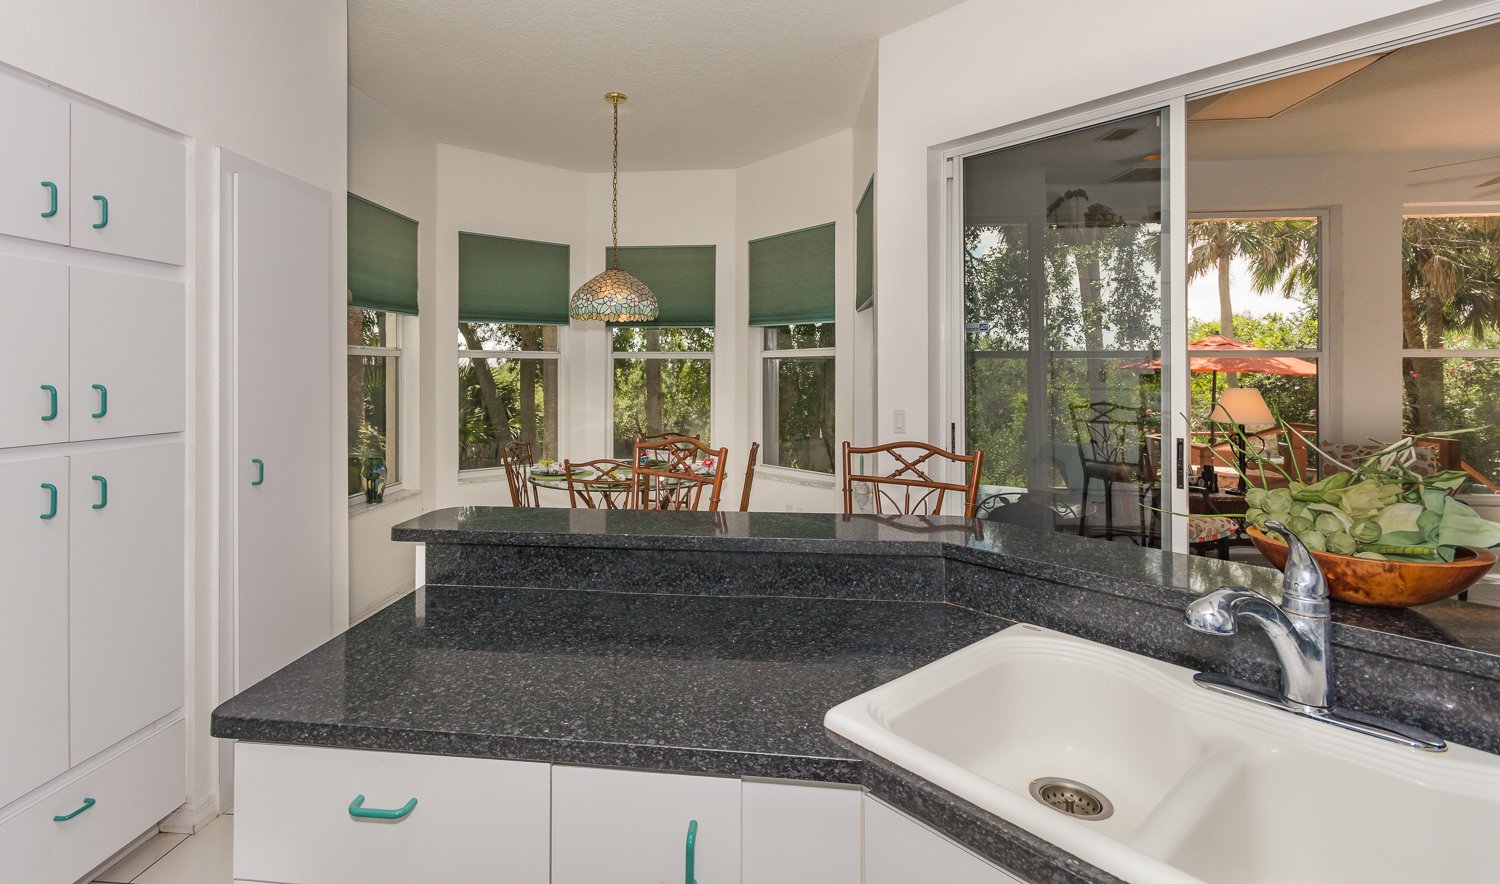 Fully equipped kitchen with everything you'll need to prepare your favorite island delight.